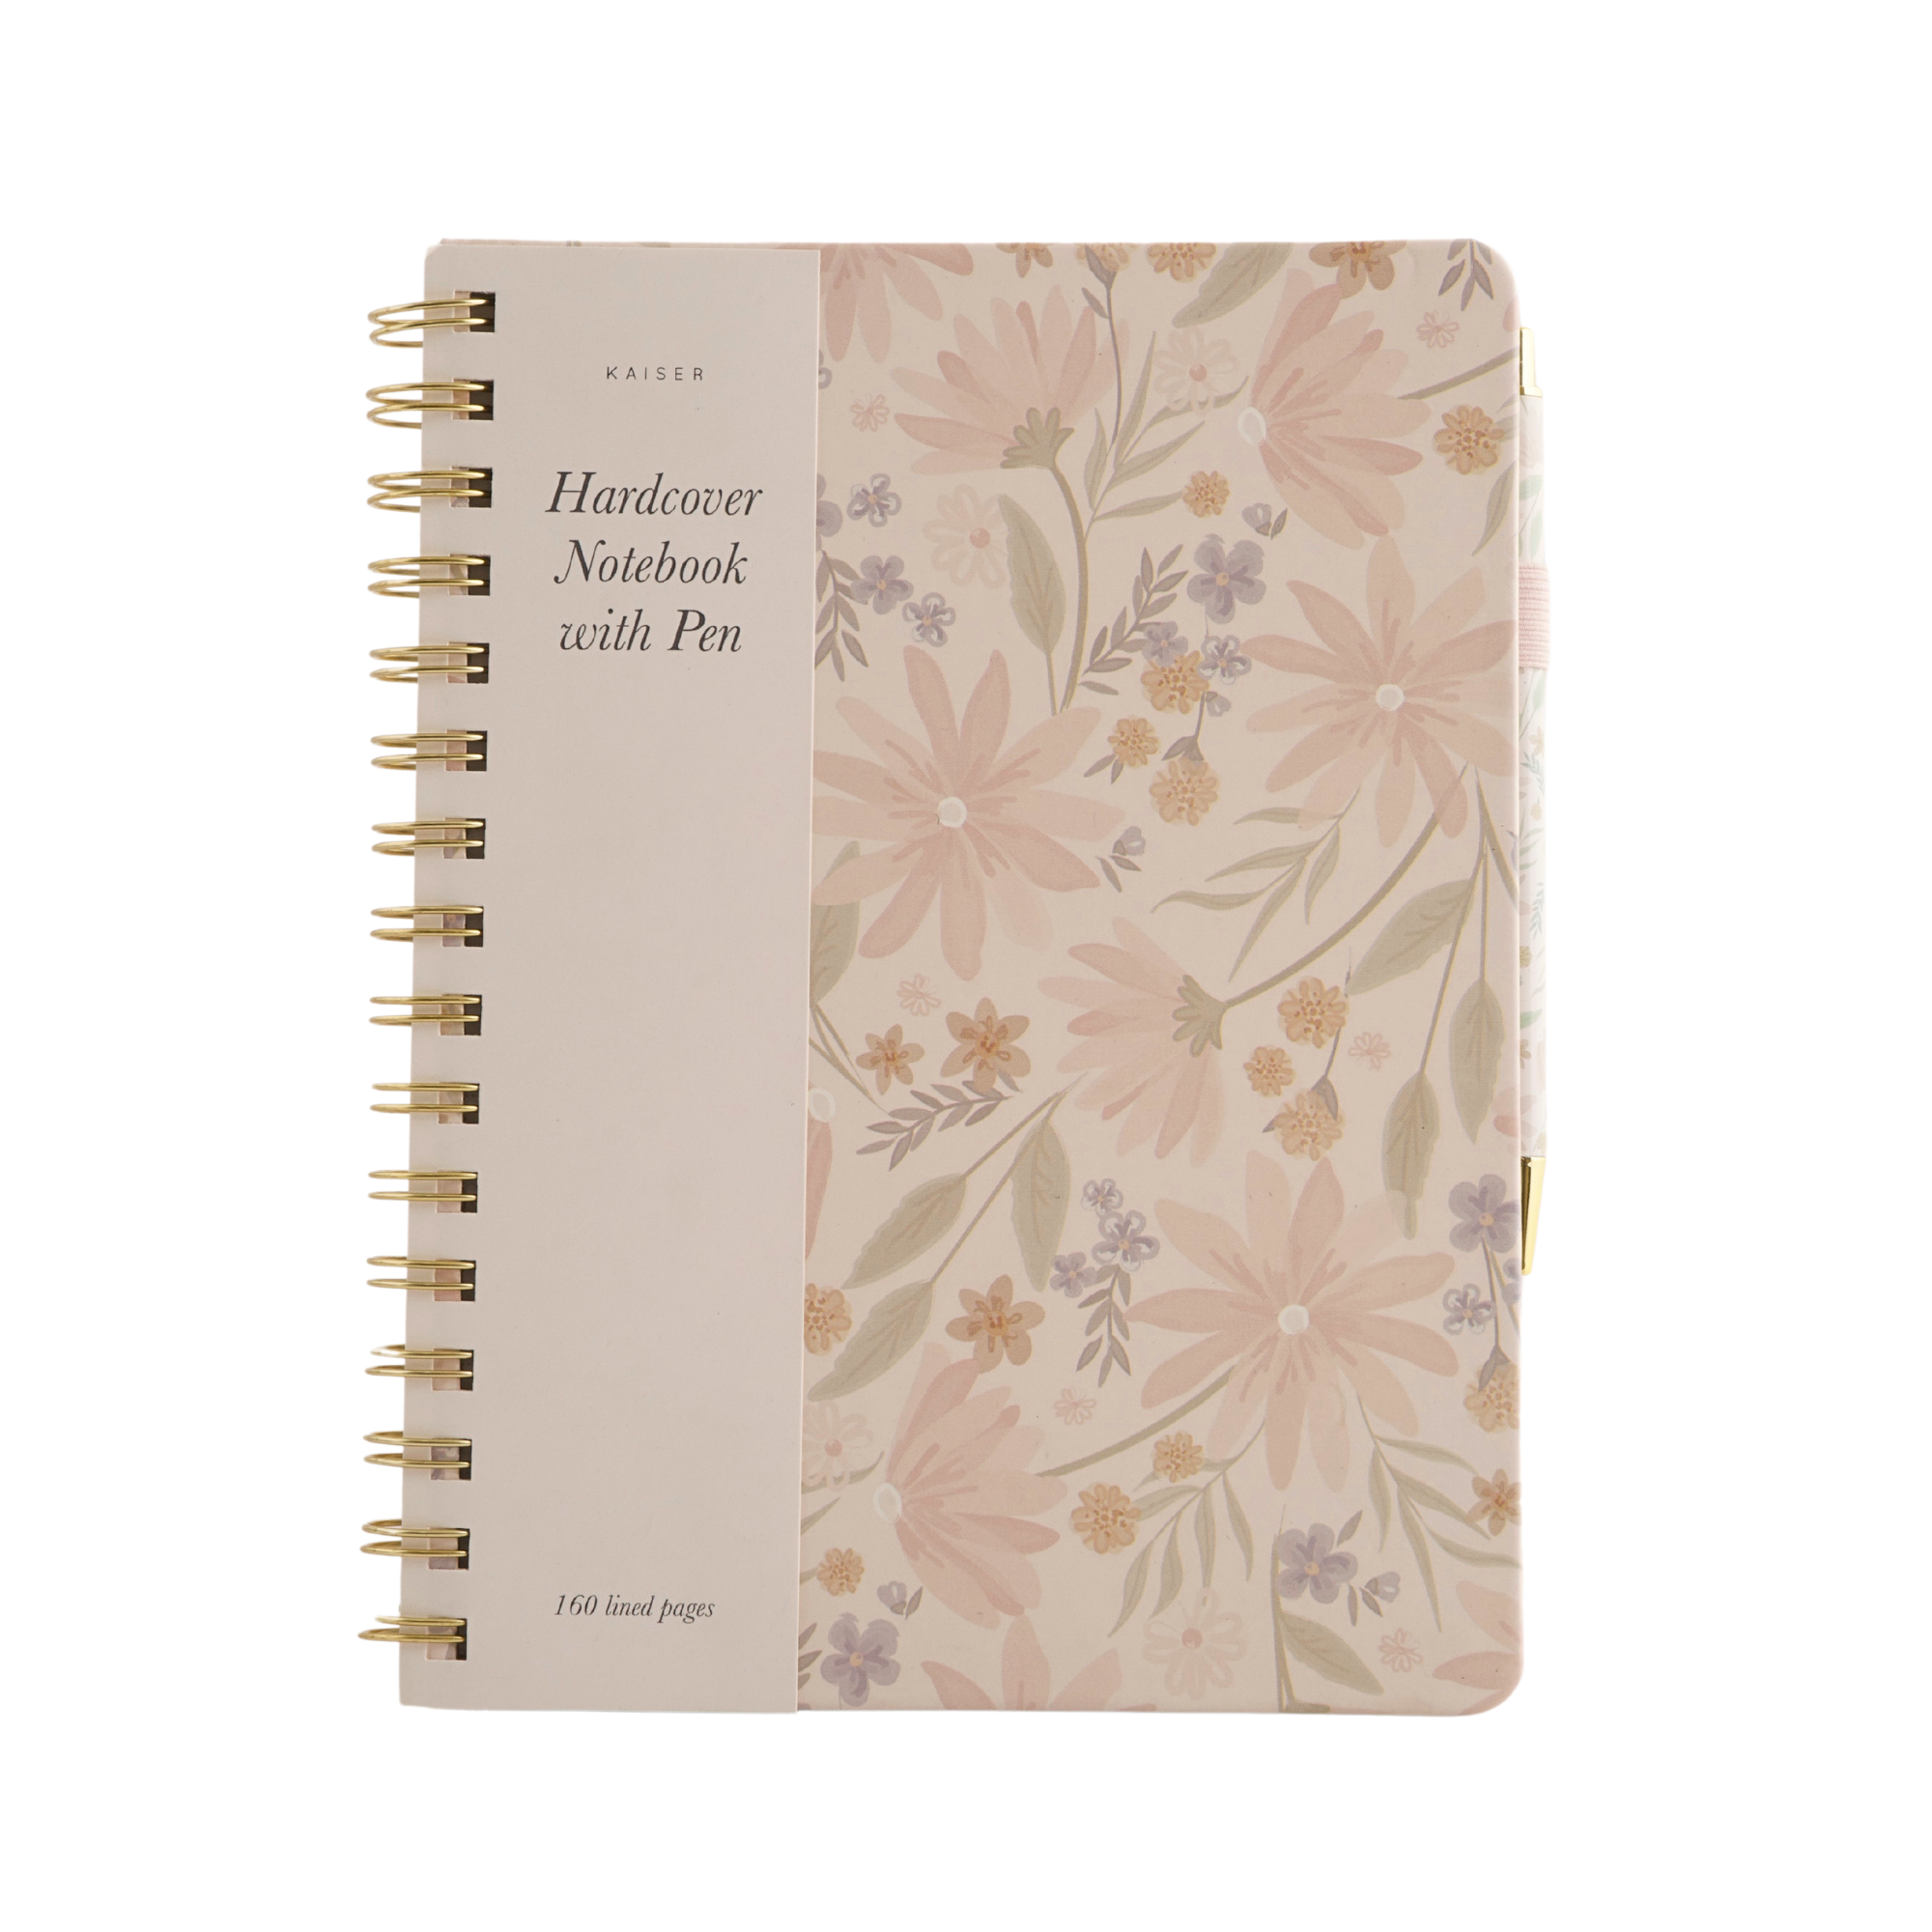 Hardcover Notebook With Pen - Blushing Floral